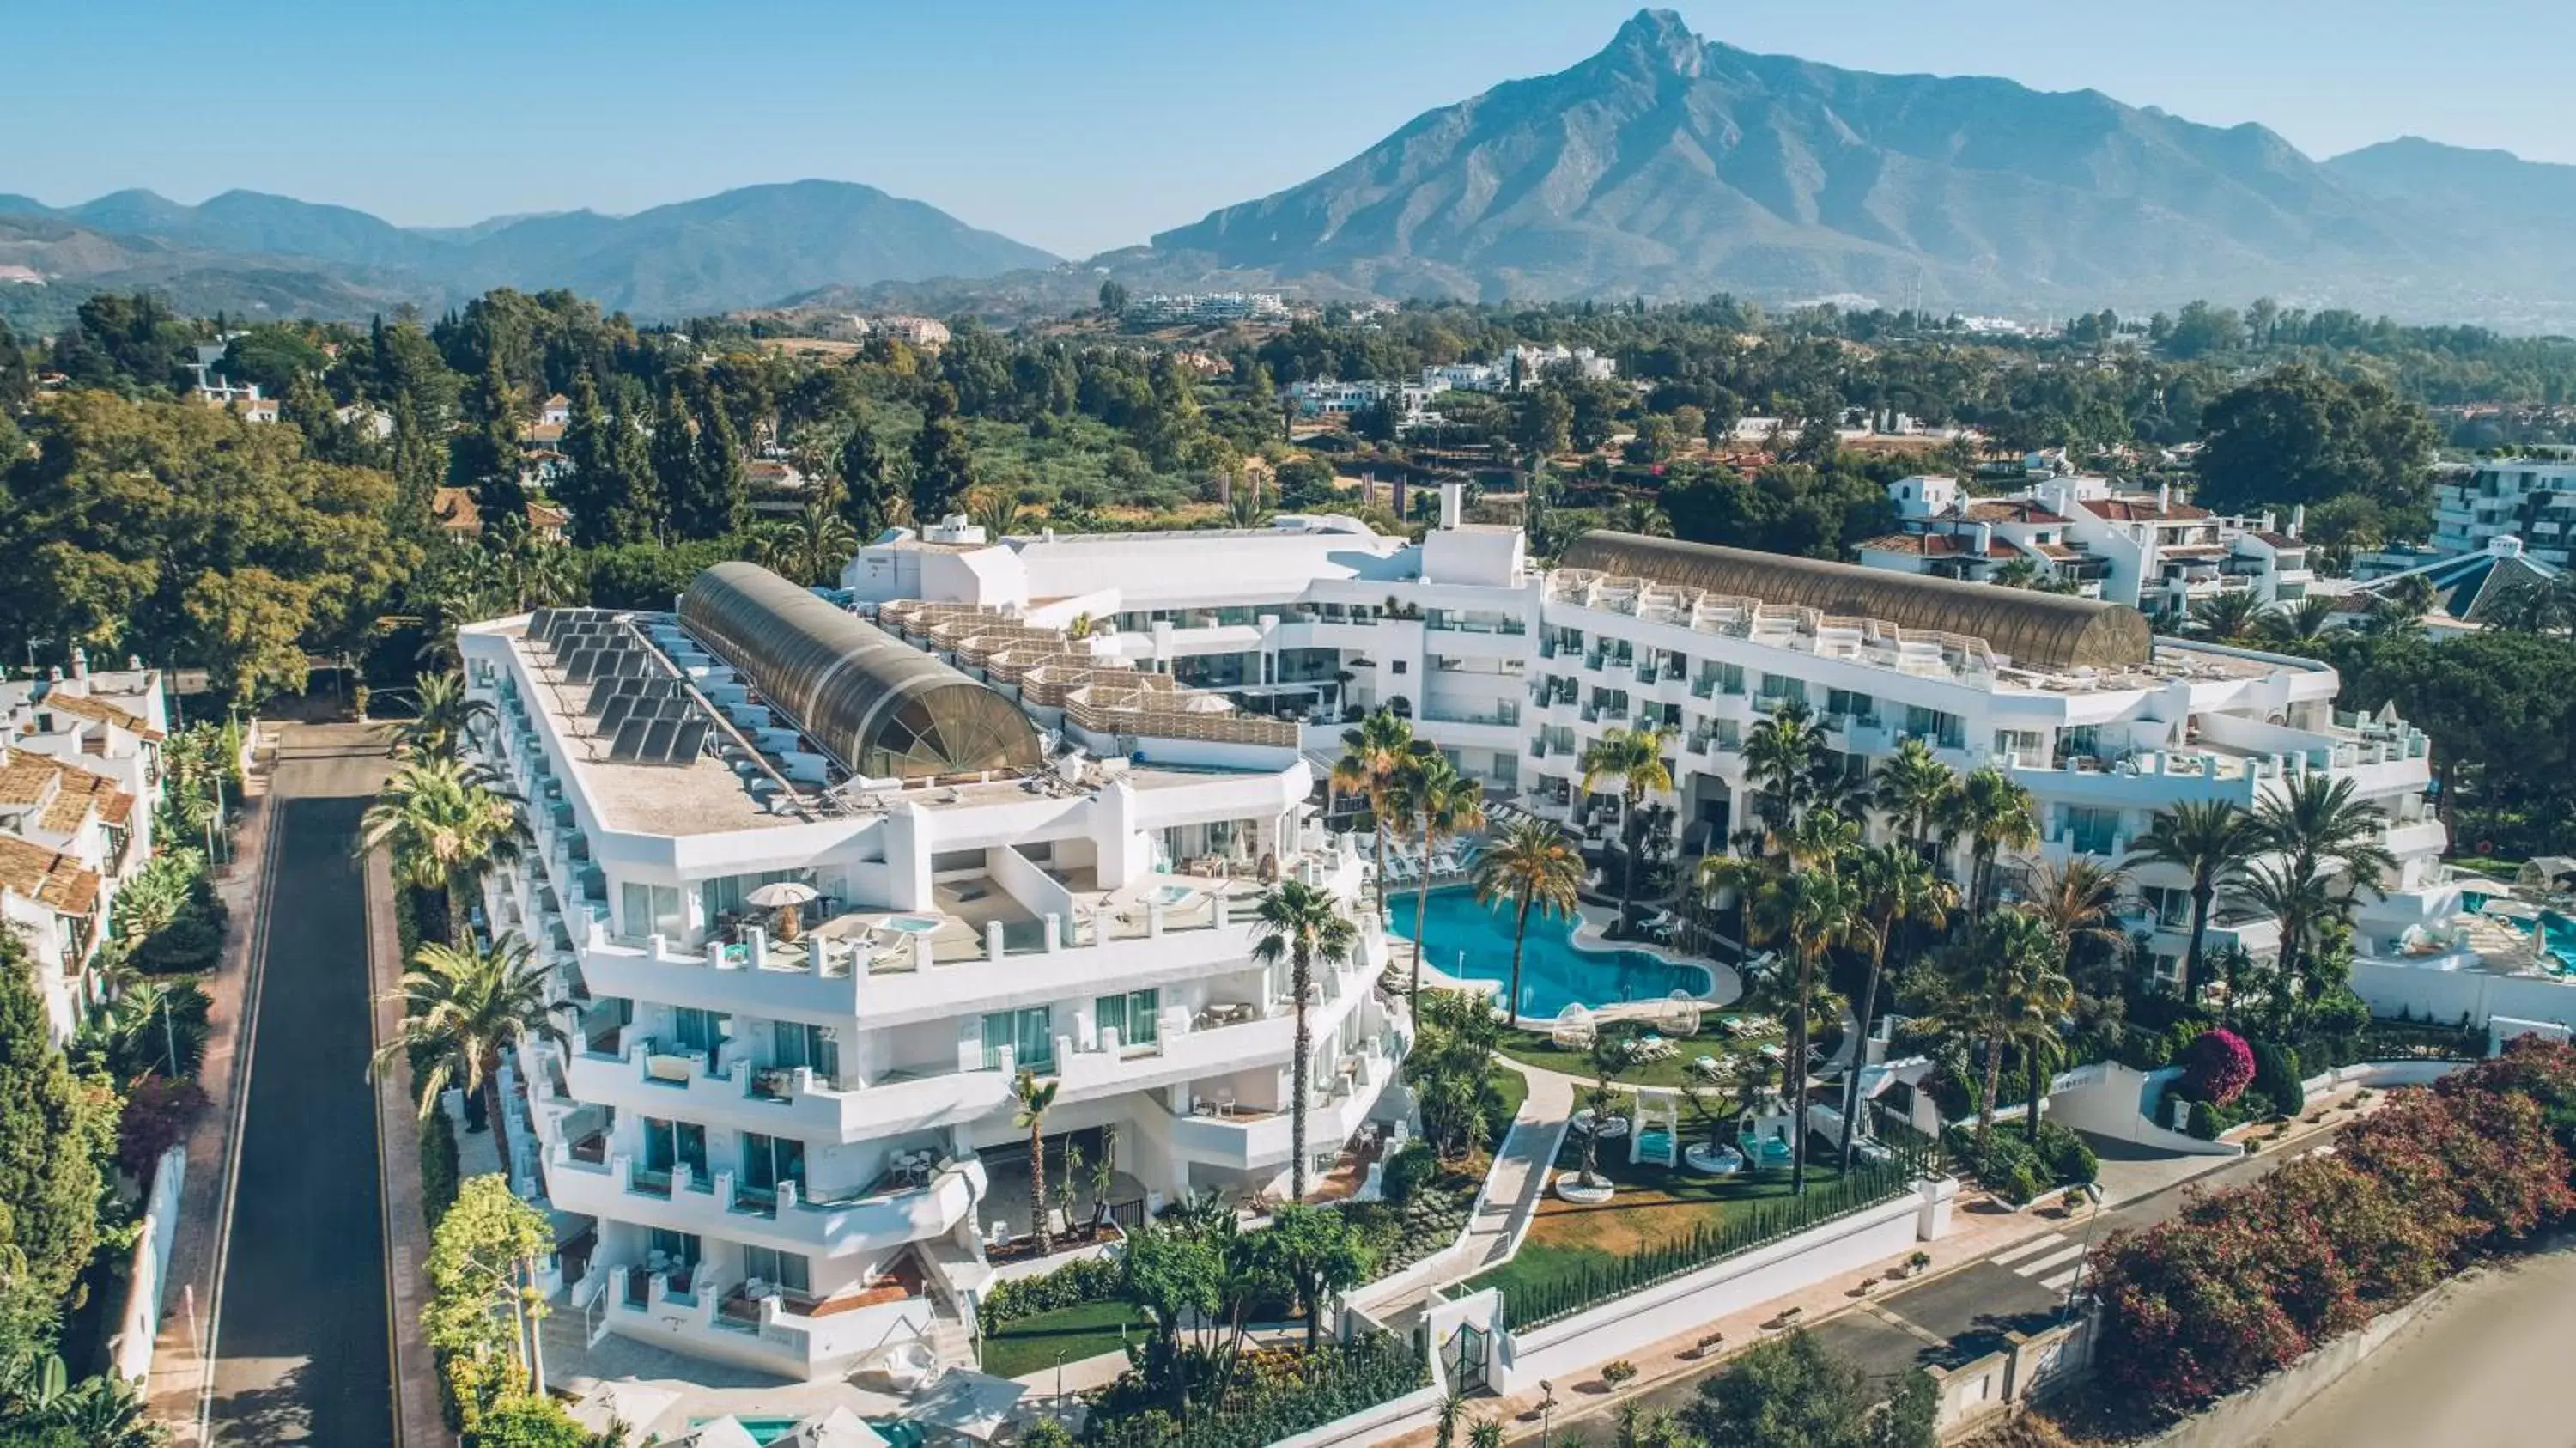 Off site, Bird's-eye View in Iberostar Selection Marbella Coral Beach